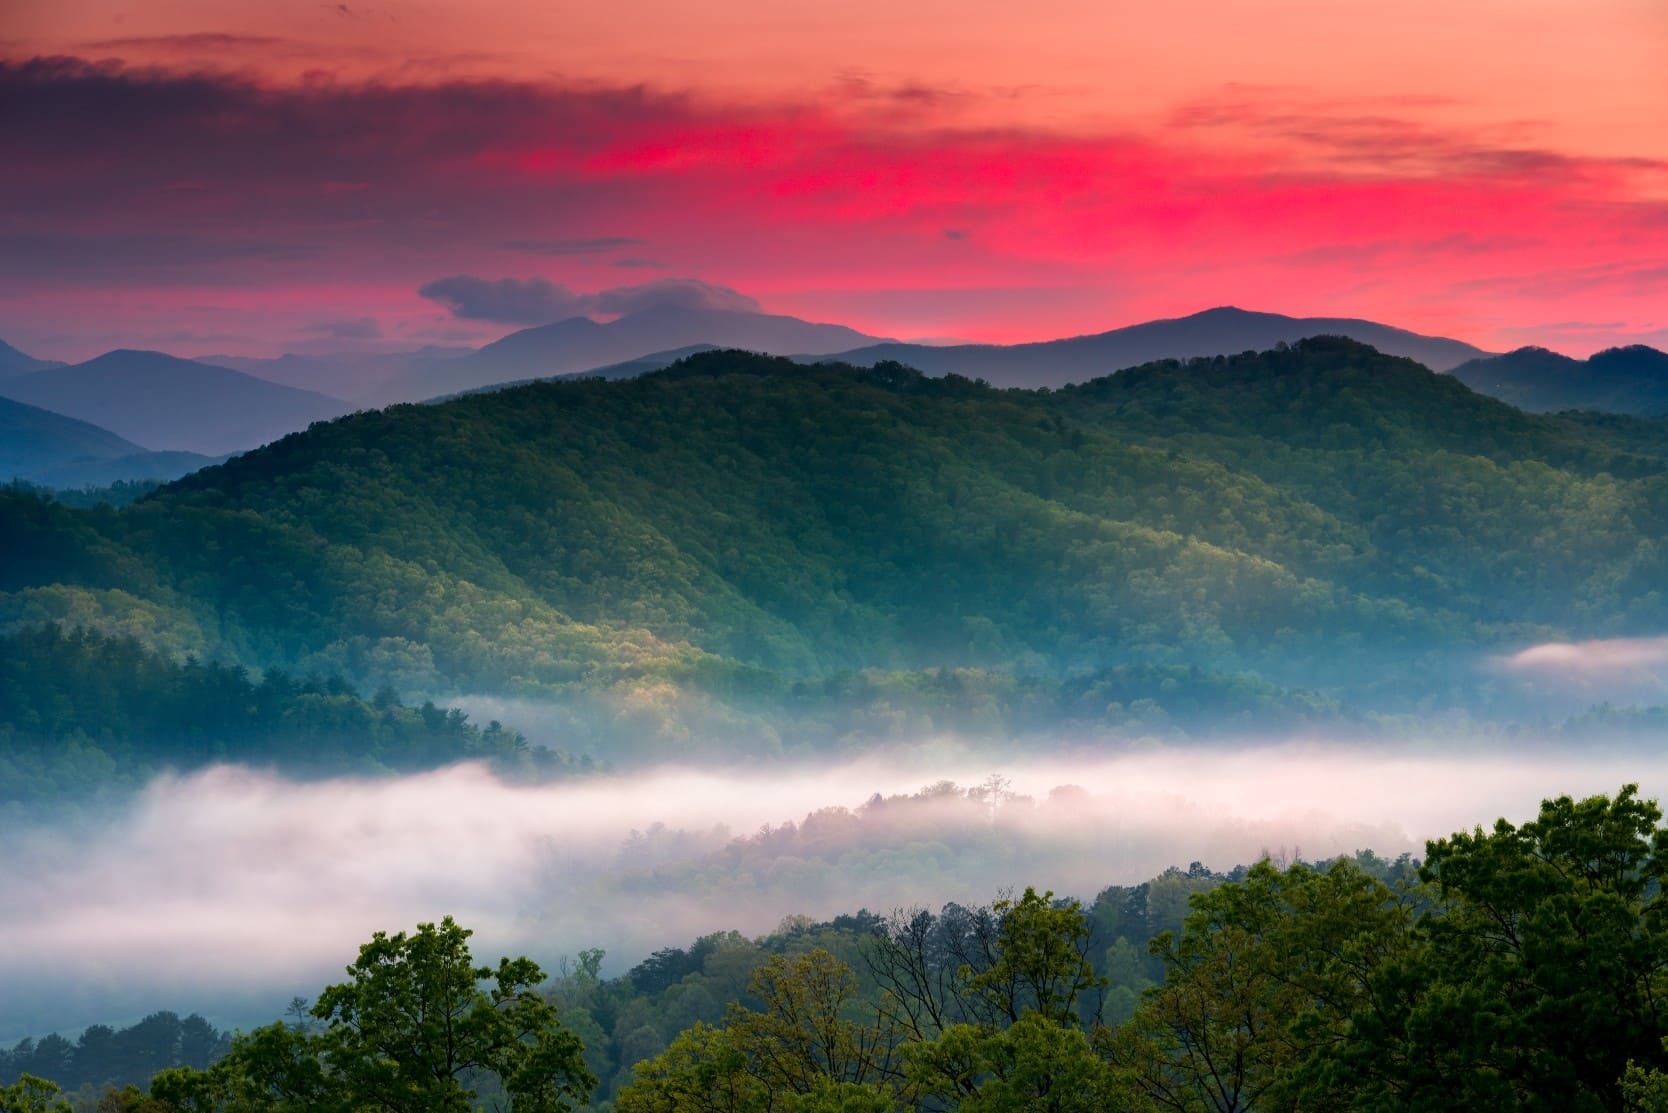 View of sunset in the Great Smoky Mountains National Park close to Seymour, Tennessee 